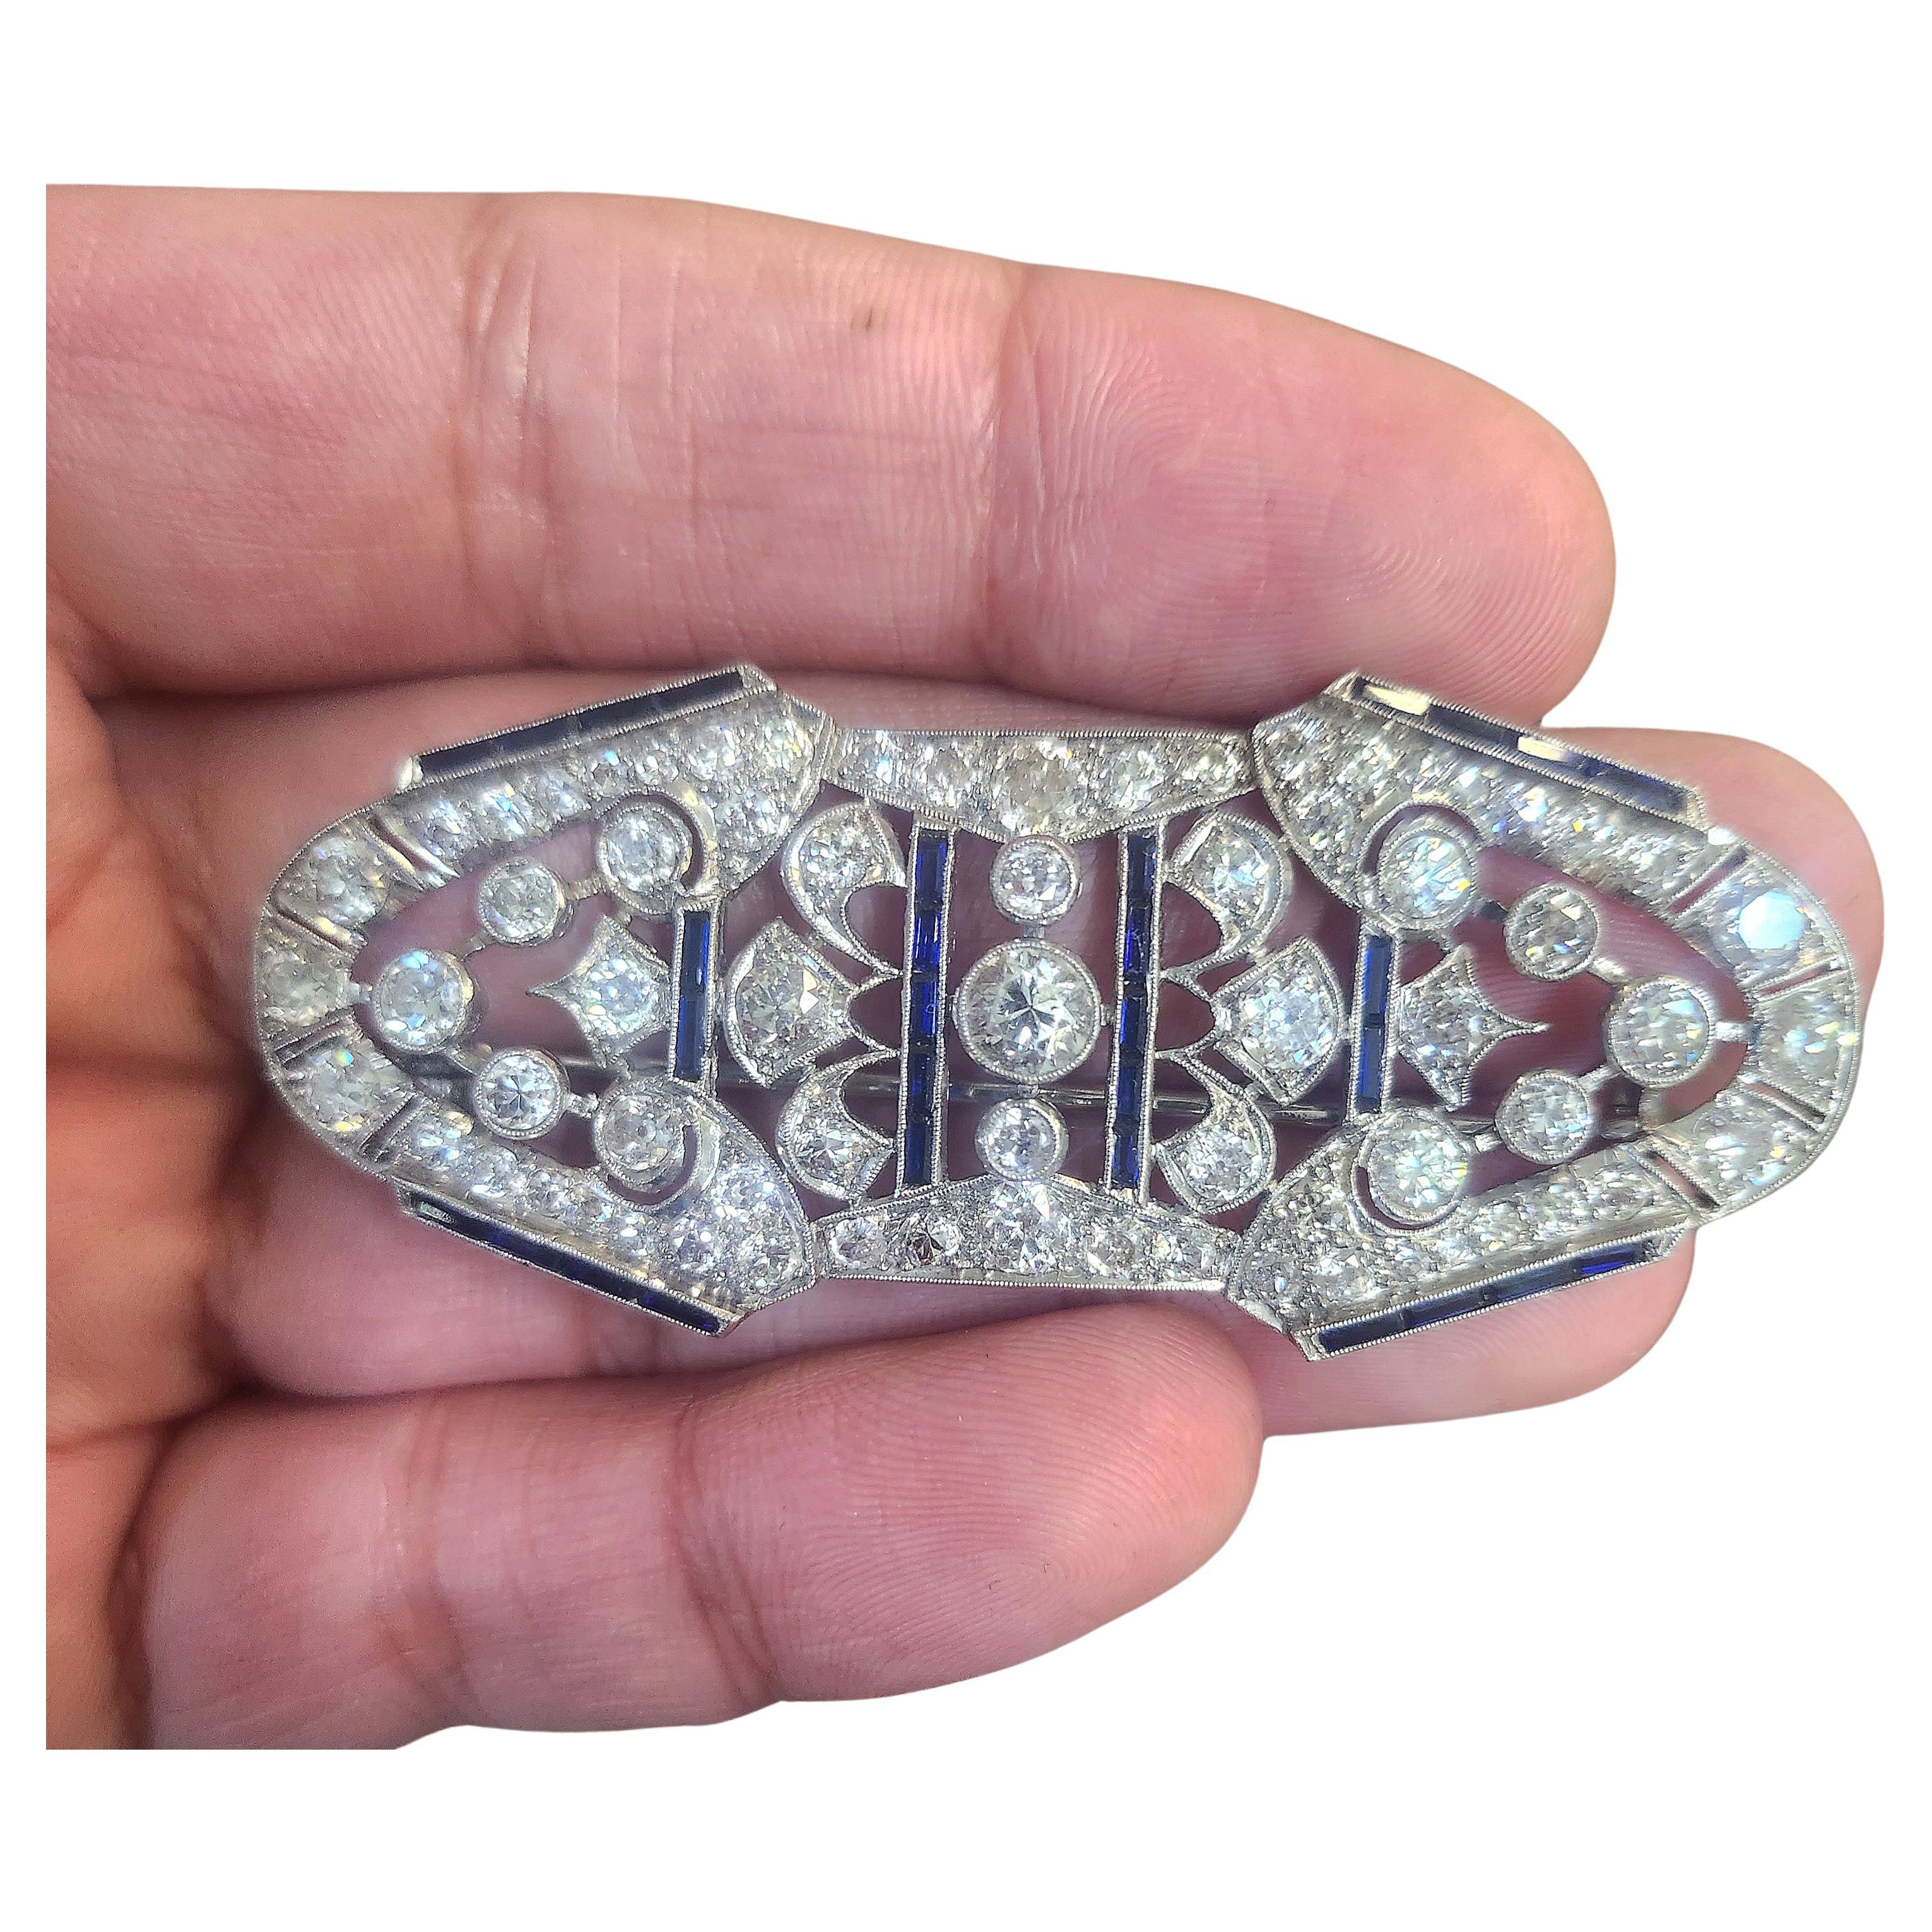 Art deco era 1920s large platinum brooch with an estimate weight of old european cut diamonds 7.5 carats H color vs/si clearity and total platinum weight of 23 grams dates back to europe 1920s